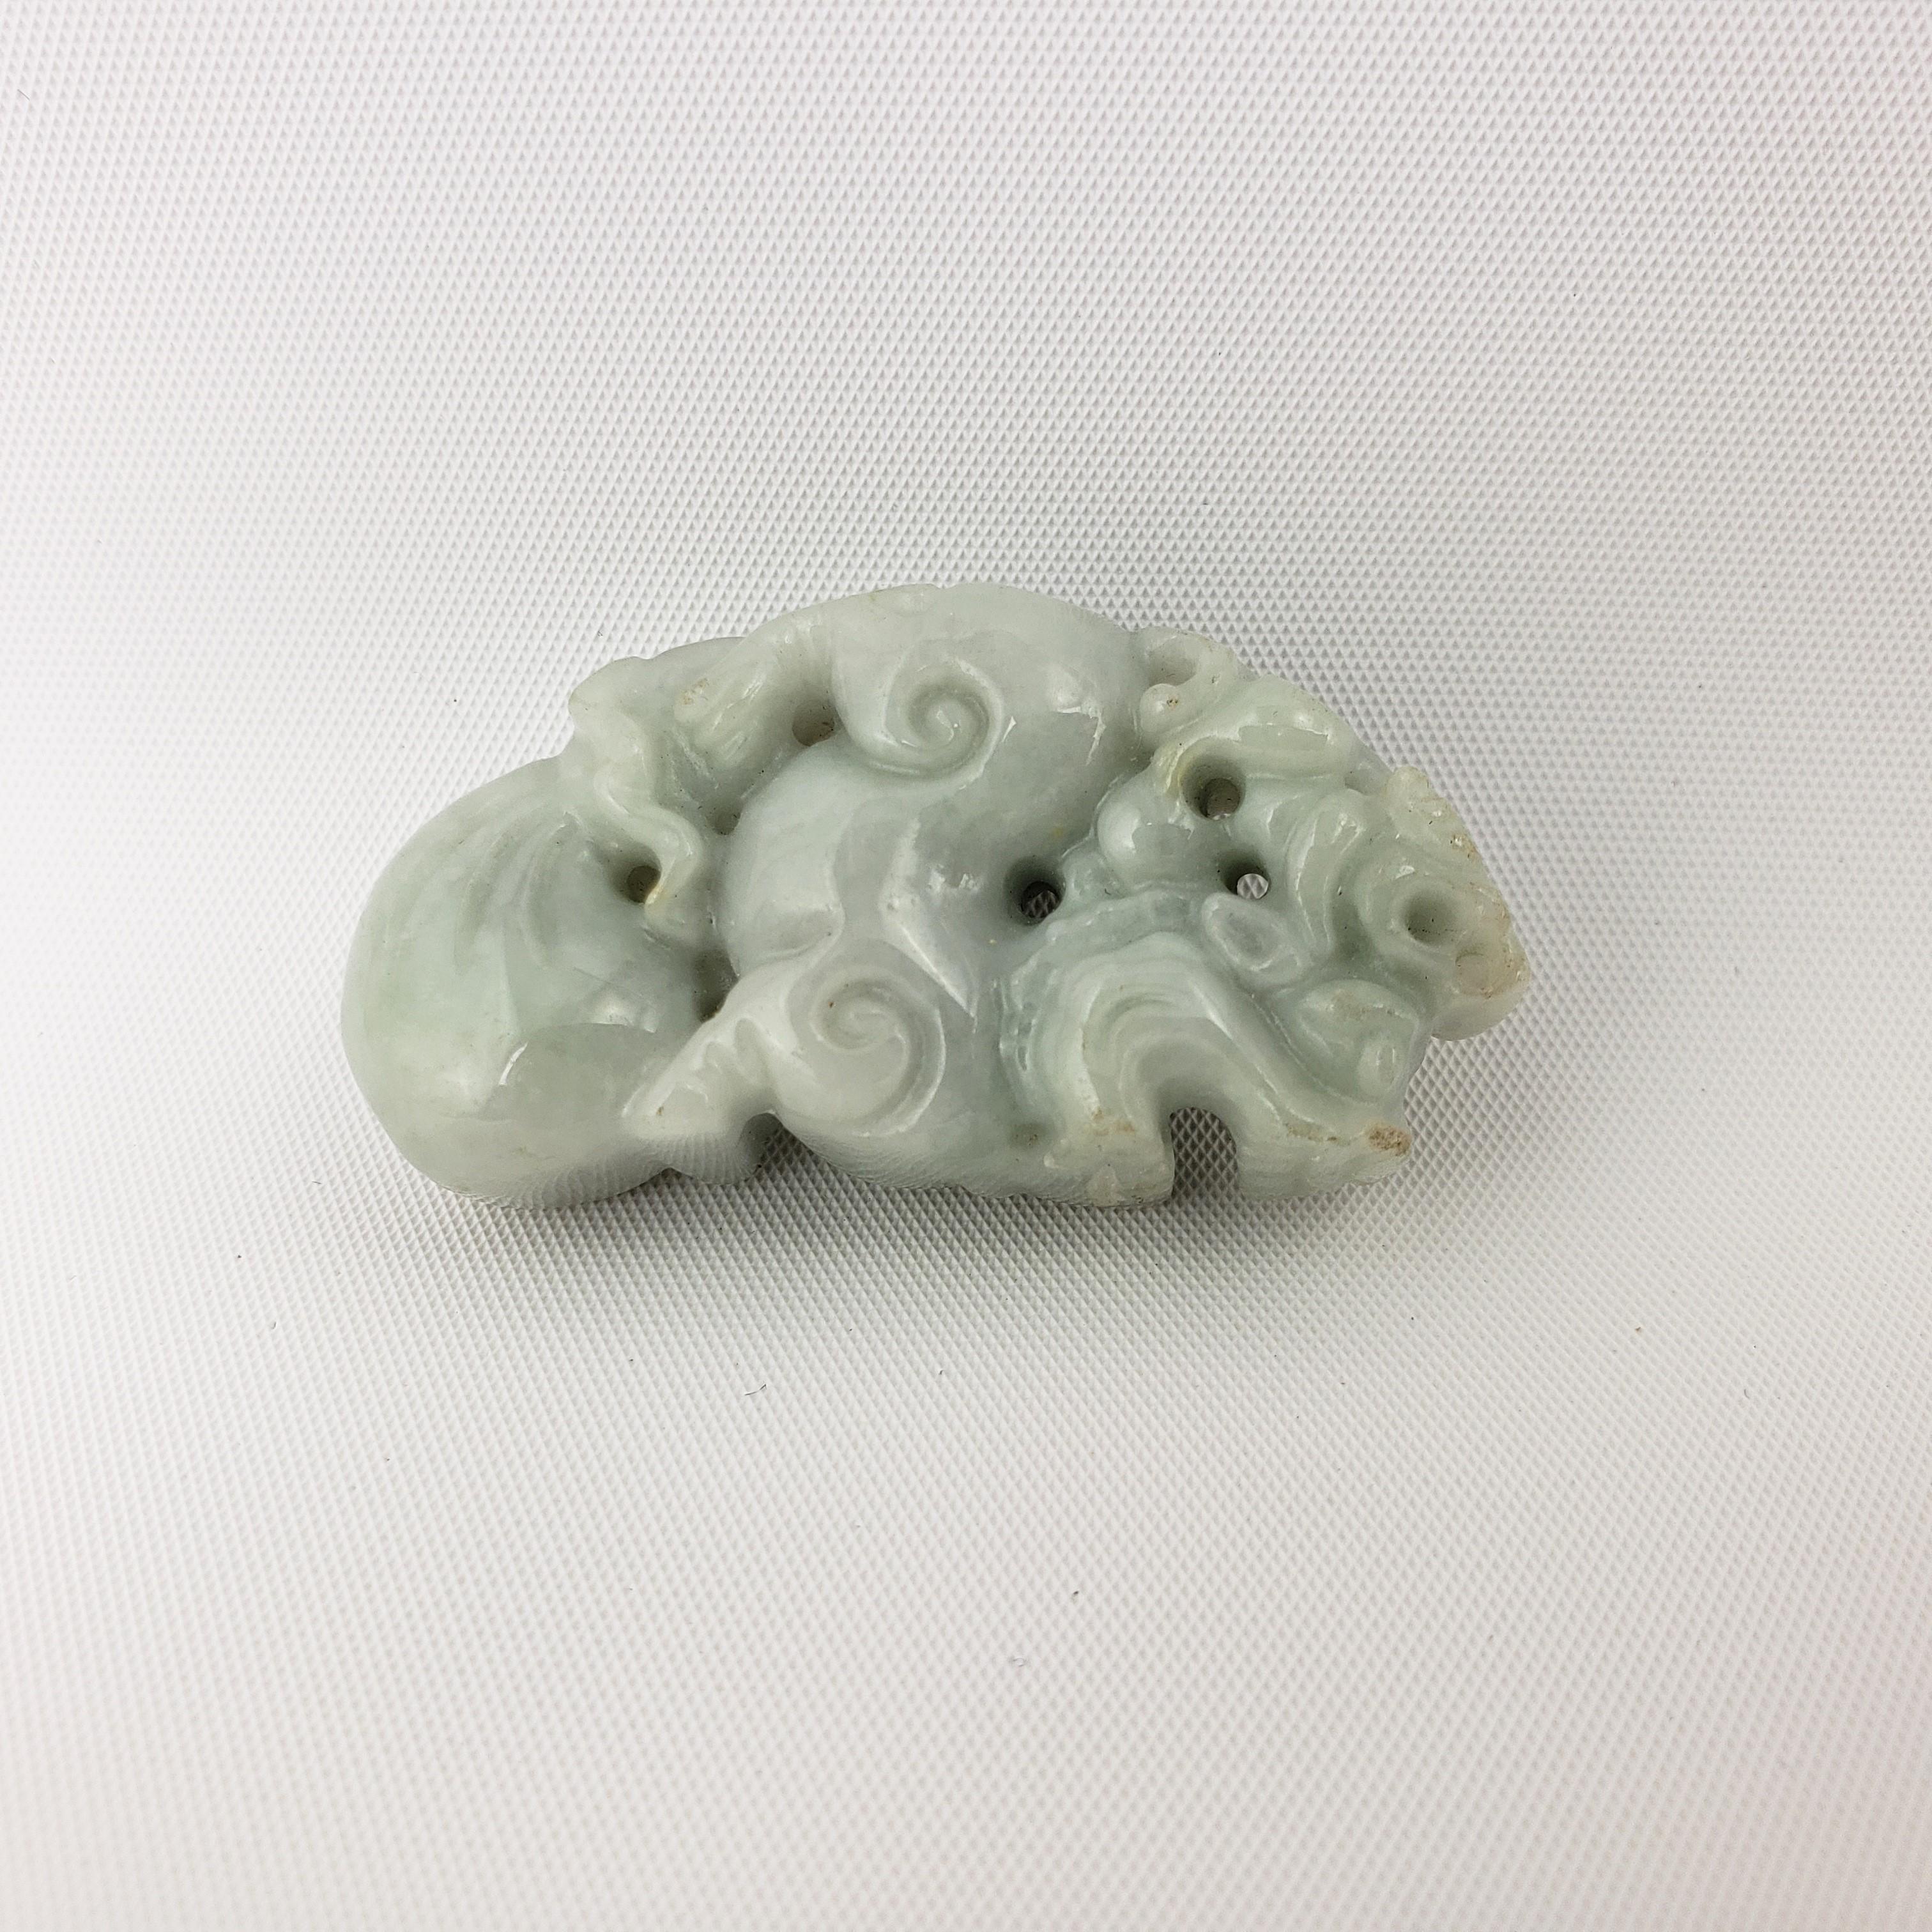 Nicely carved Jade pendant. Weight: 29.13 grams.
Jewelry / Necklace.